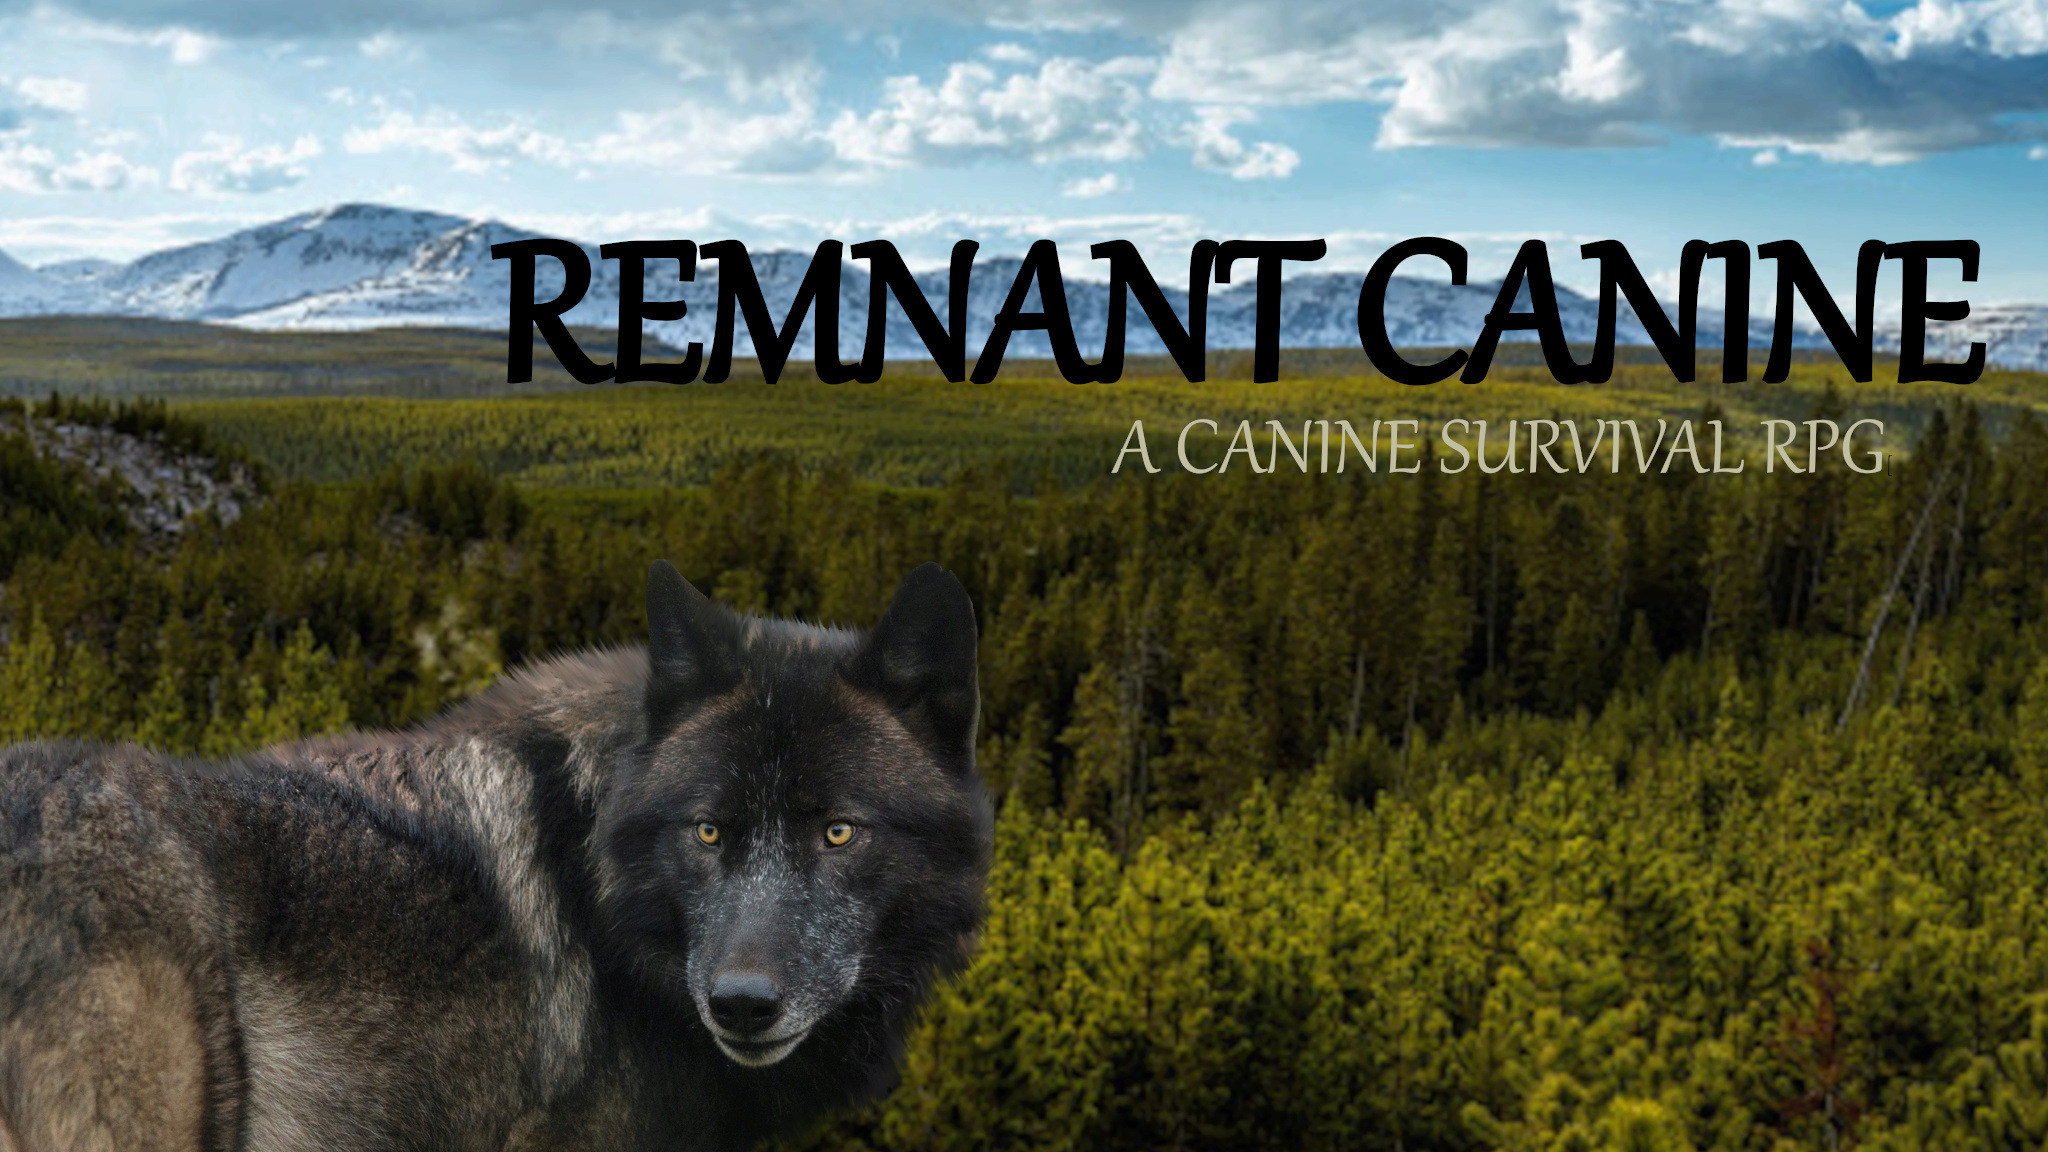 Remnant Canine